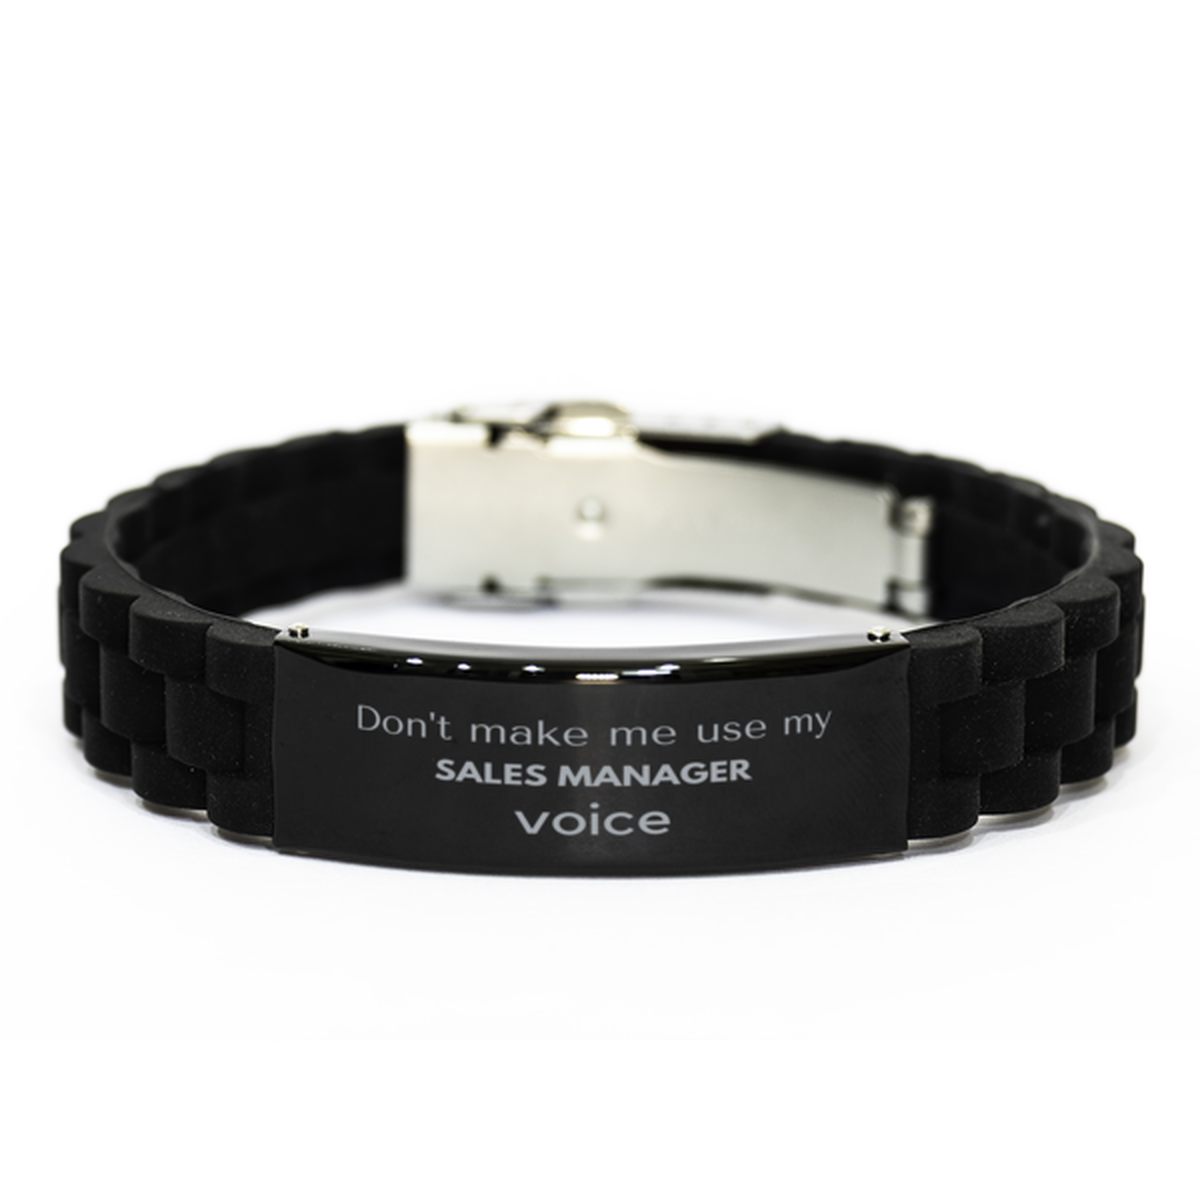 Don't make me use my Sales Manager voice, Sarcasm Sales Manager Gifts, Christmas Sales Manager Black Glidelock Clasp Bracelet Birthday Unique Gifts For Sales Manager Coworkers, Men, Women, Colleague, Friends